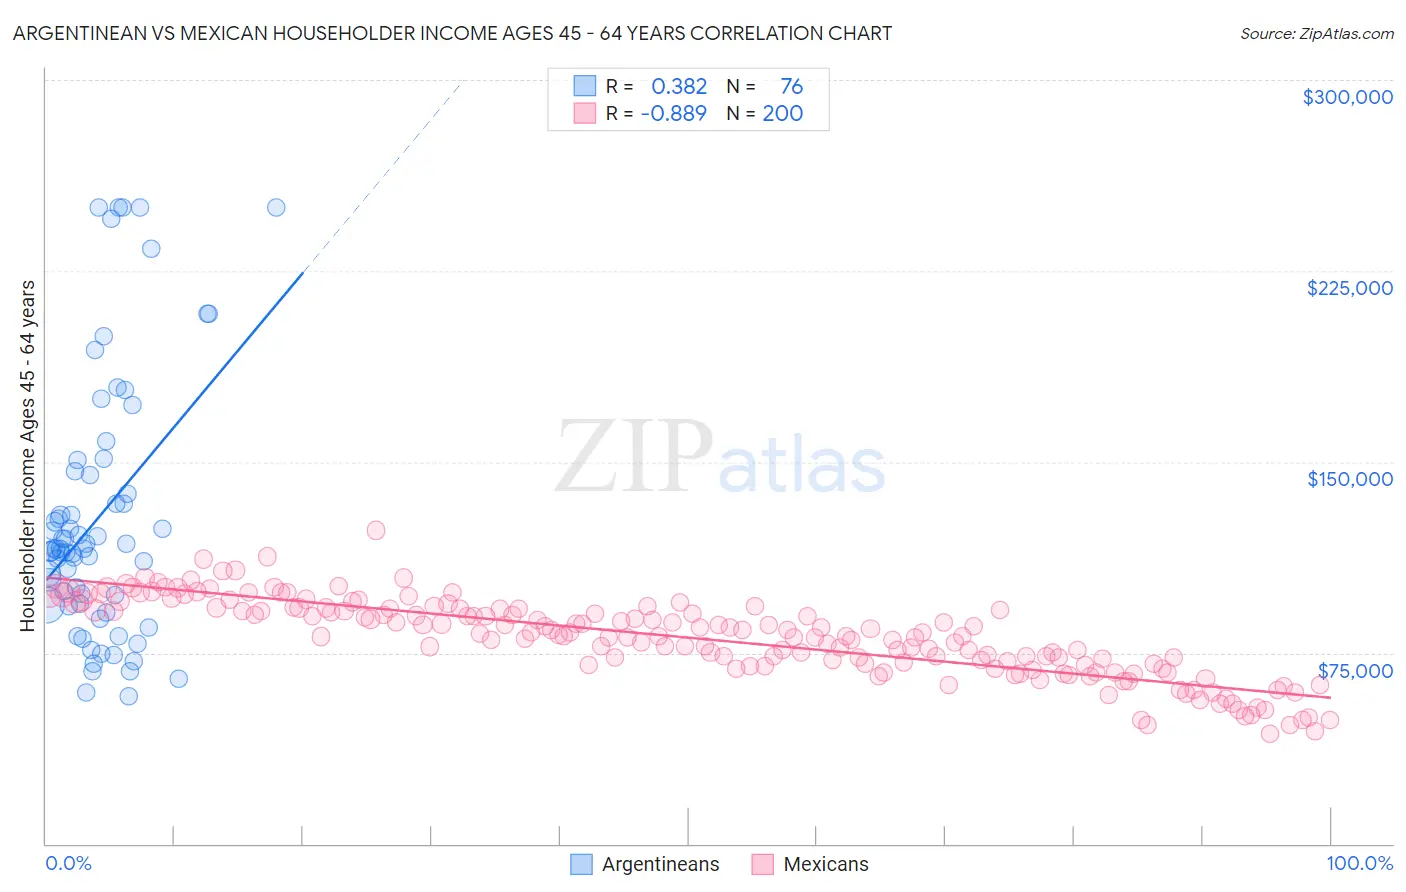 Argentinean vs Mexican Householder Income Ages 45 - 64 years